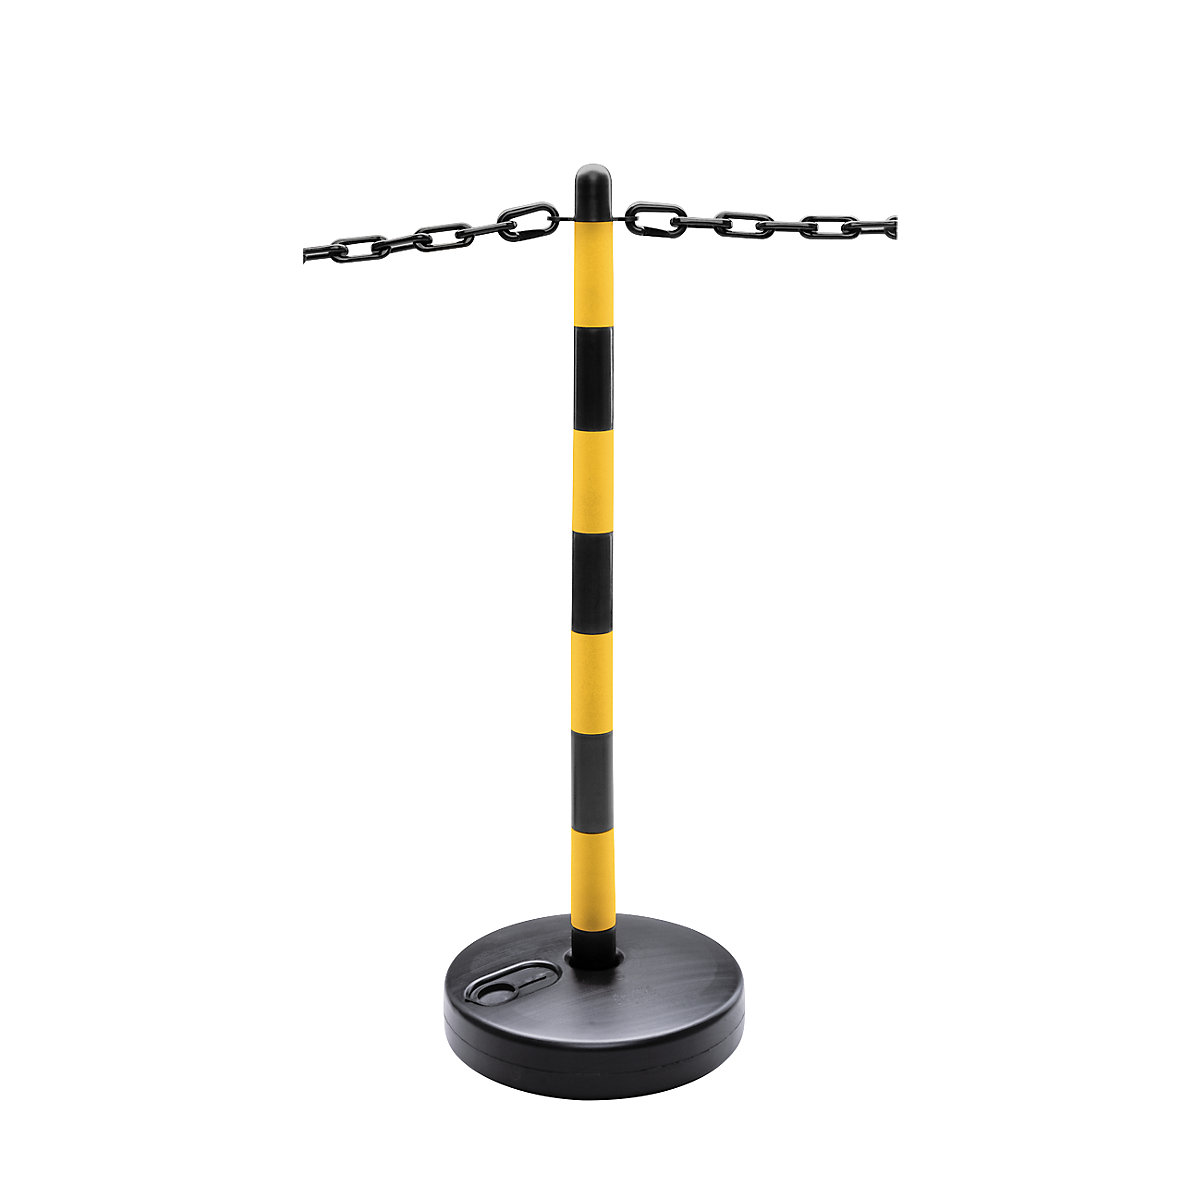 Chain stand set, round plastic base, can be filled, 6 posts, 10 m chain, black / yellow